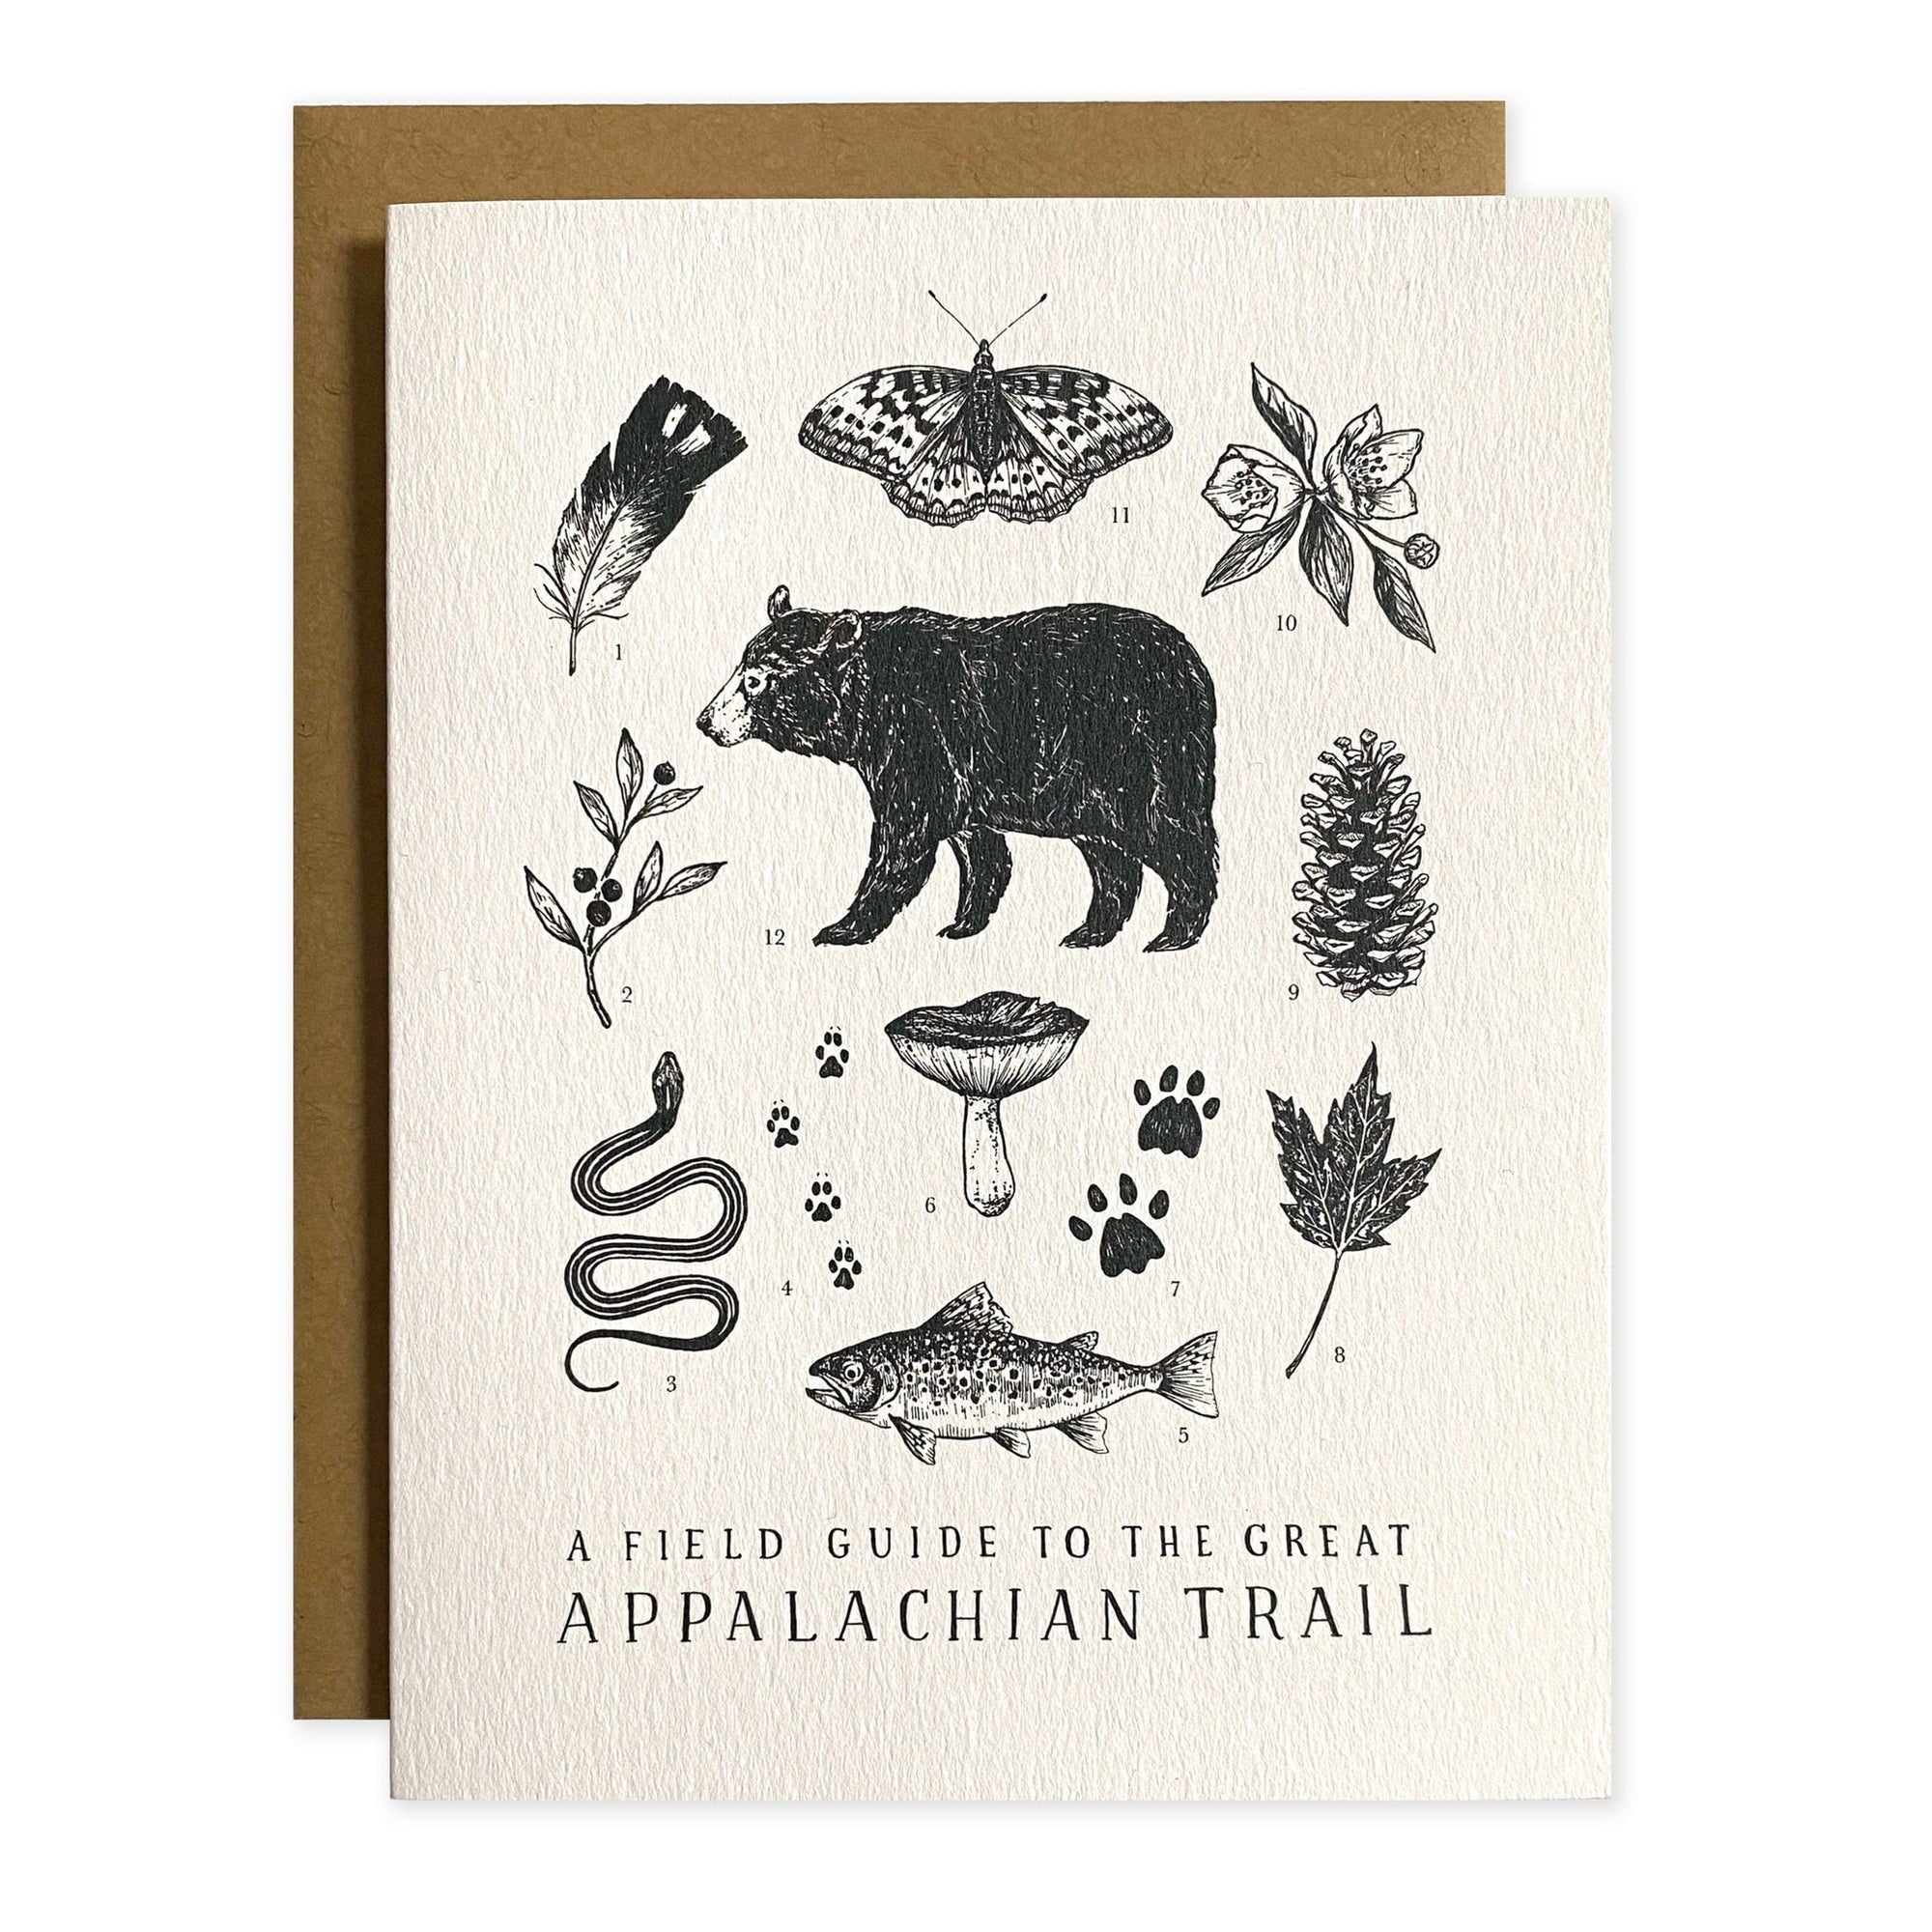 A field guide to the great Appalachian Trail greeting card - The Wild Wander Appalachian Trail Field Guide Greeting Card.